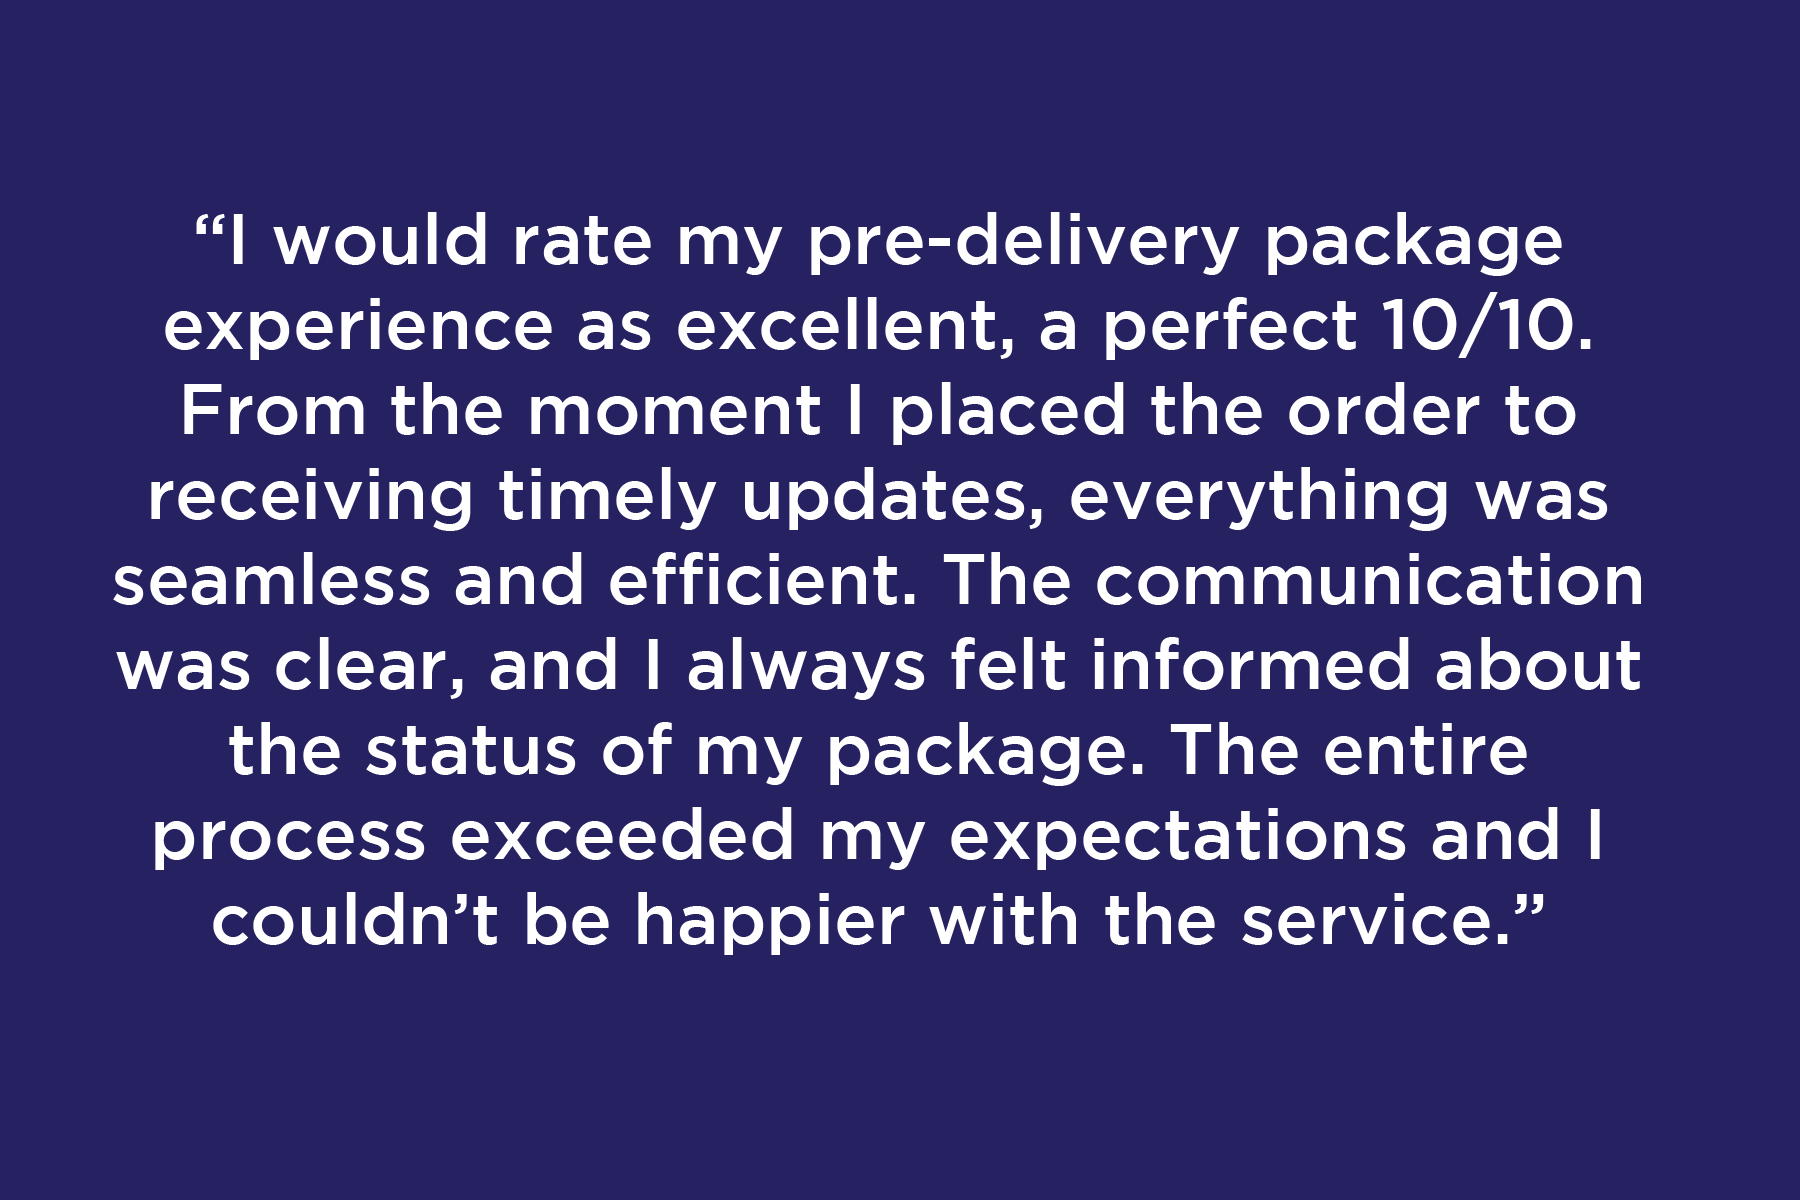 I would rate my pre-delivery package experience as excellent, a perfect 10/10. From the moment I placed the order to receiving timely updates, everything was seamless and efficient. The communication was clear, and I always felt informed about the status of my package. The entire process exceeded my expectations and I couldn’t be happier with the service.